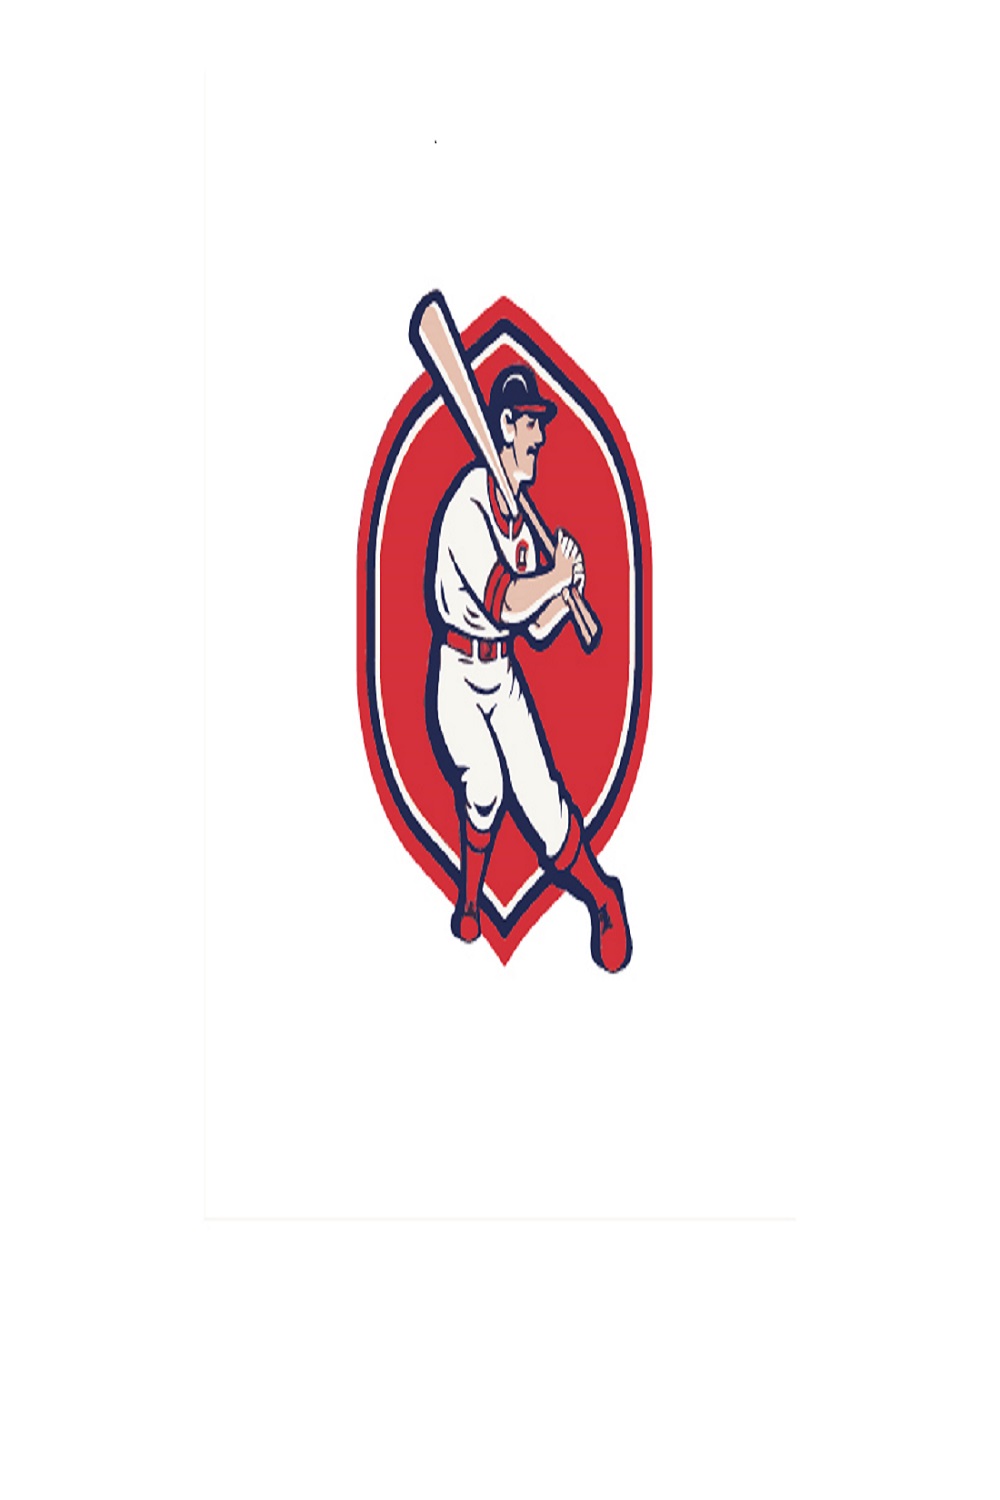 red and white vector logo perfect for sports teams, sports-themed business pinterest preview image.